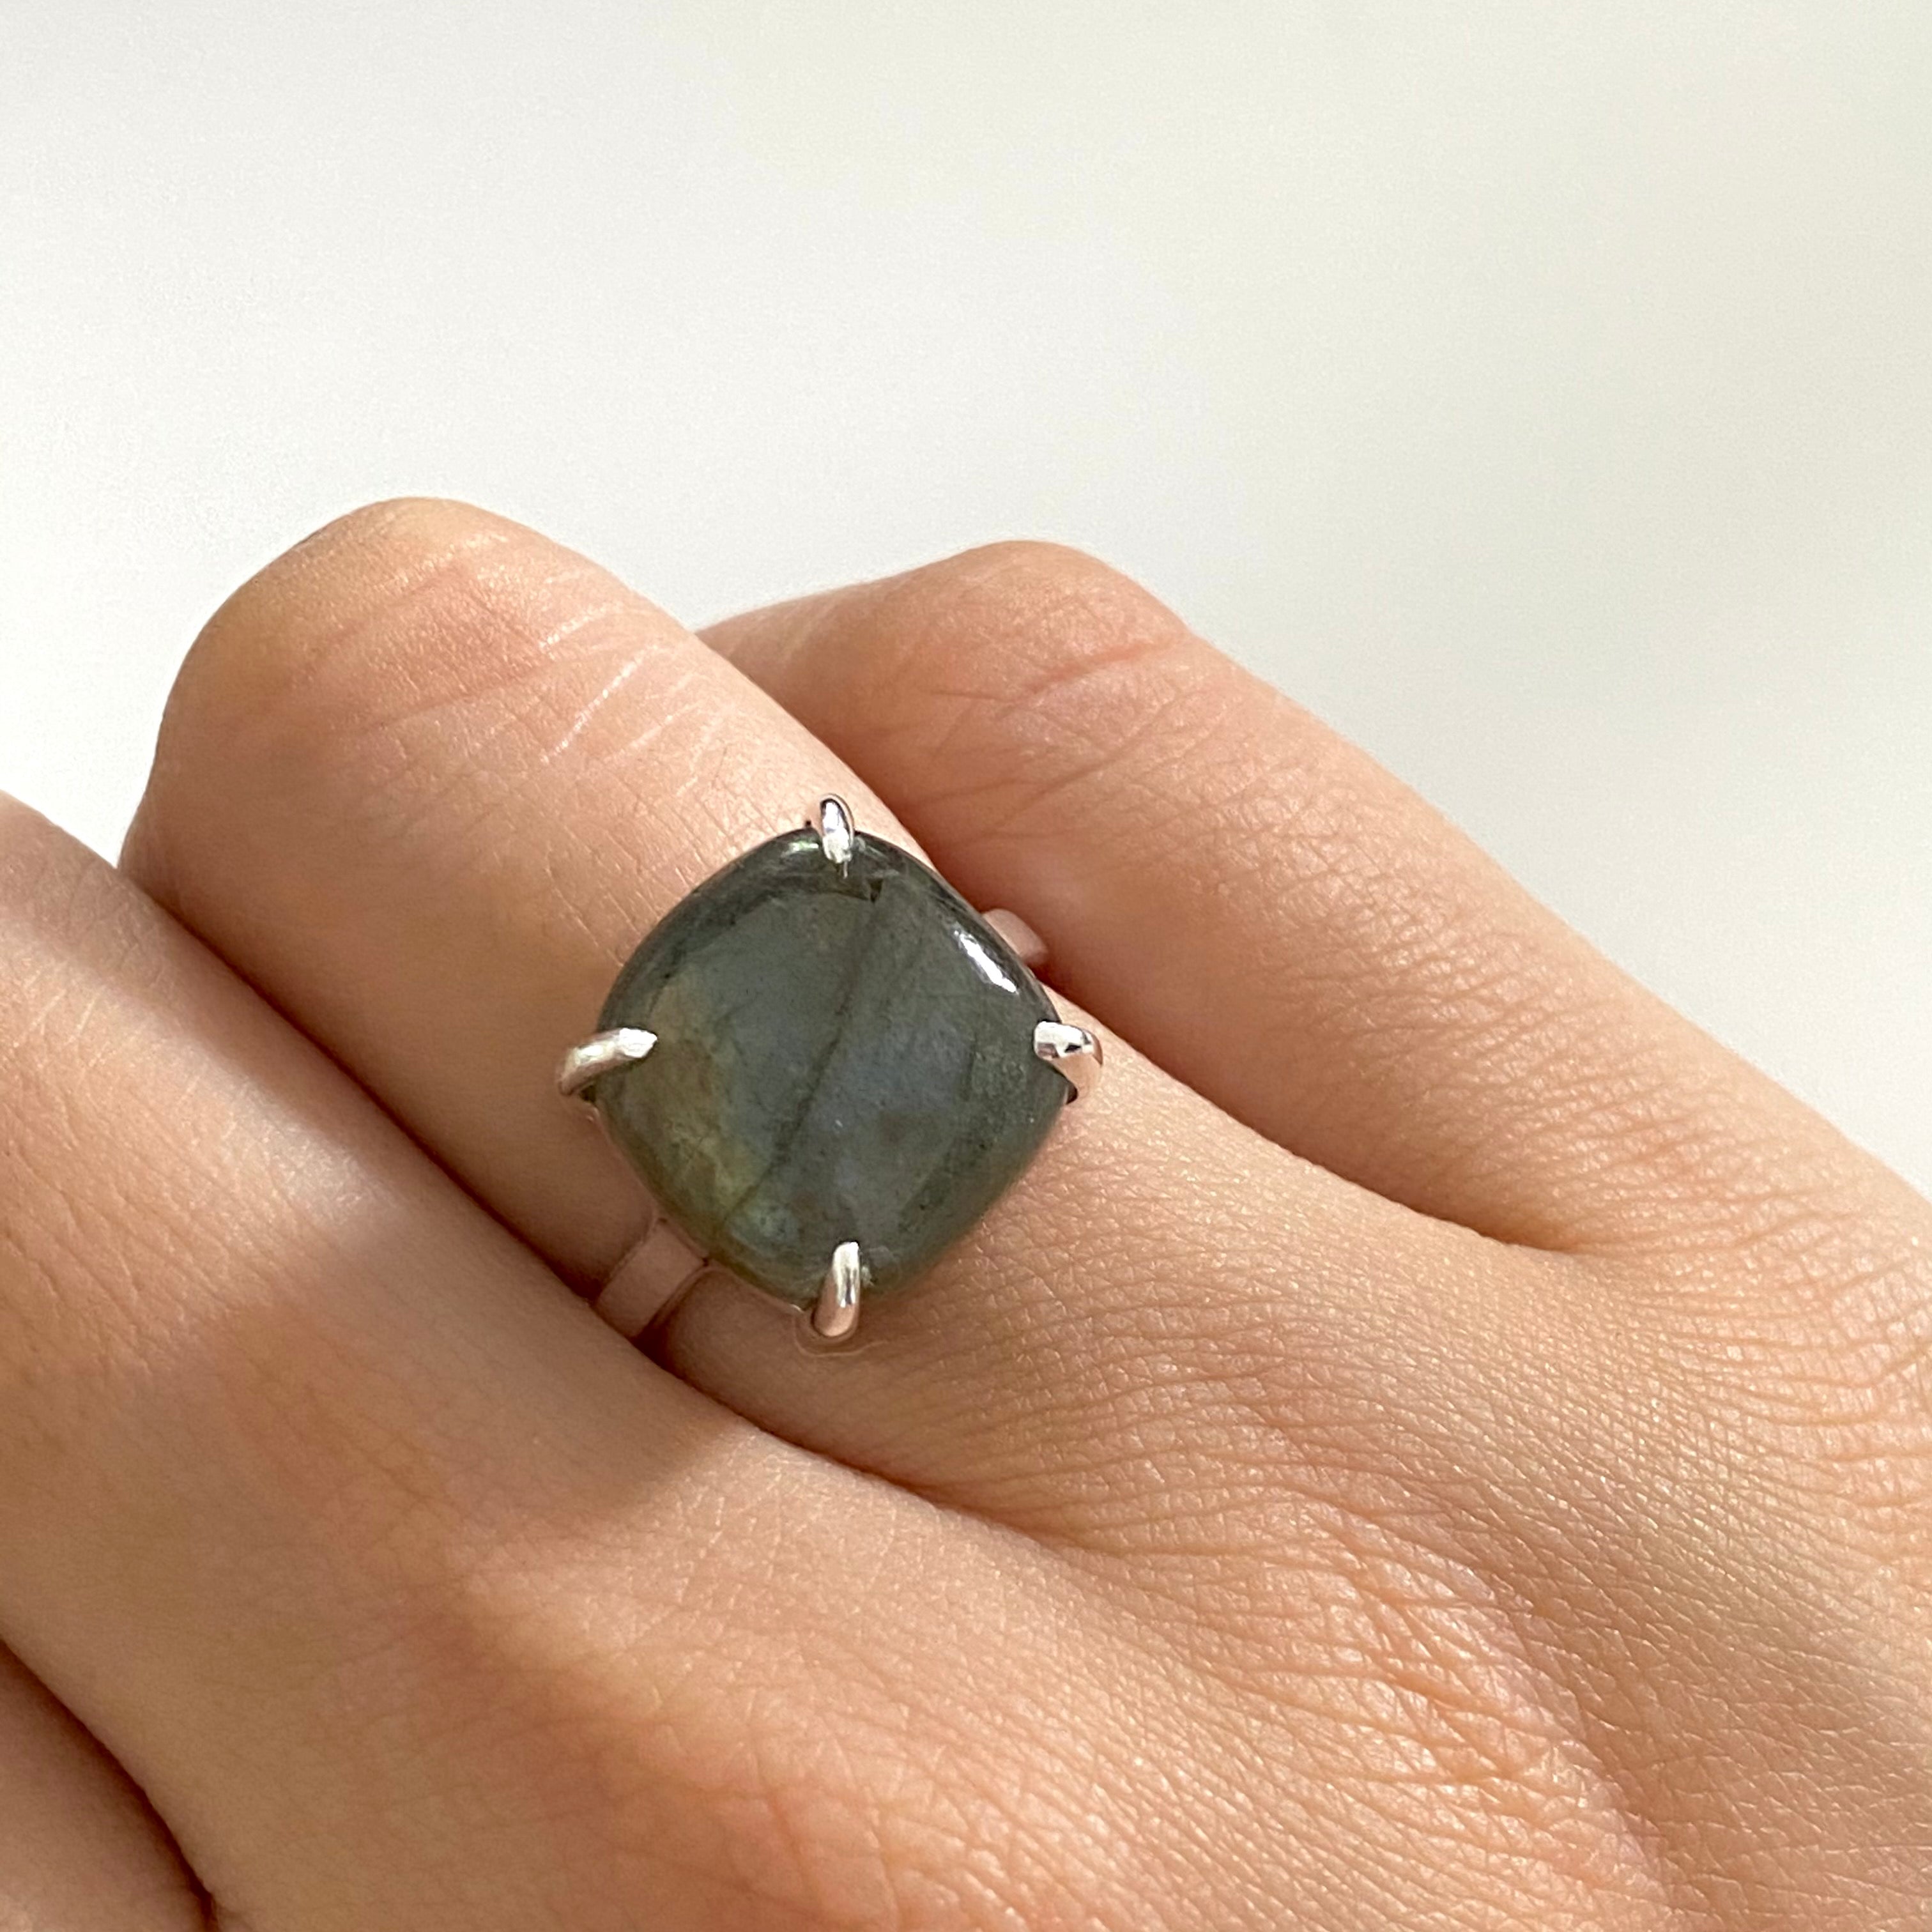 Square Cabochon Labradorite Ring in Sterling Silver